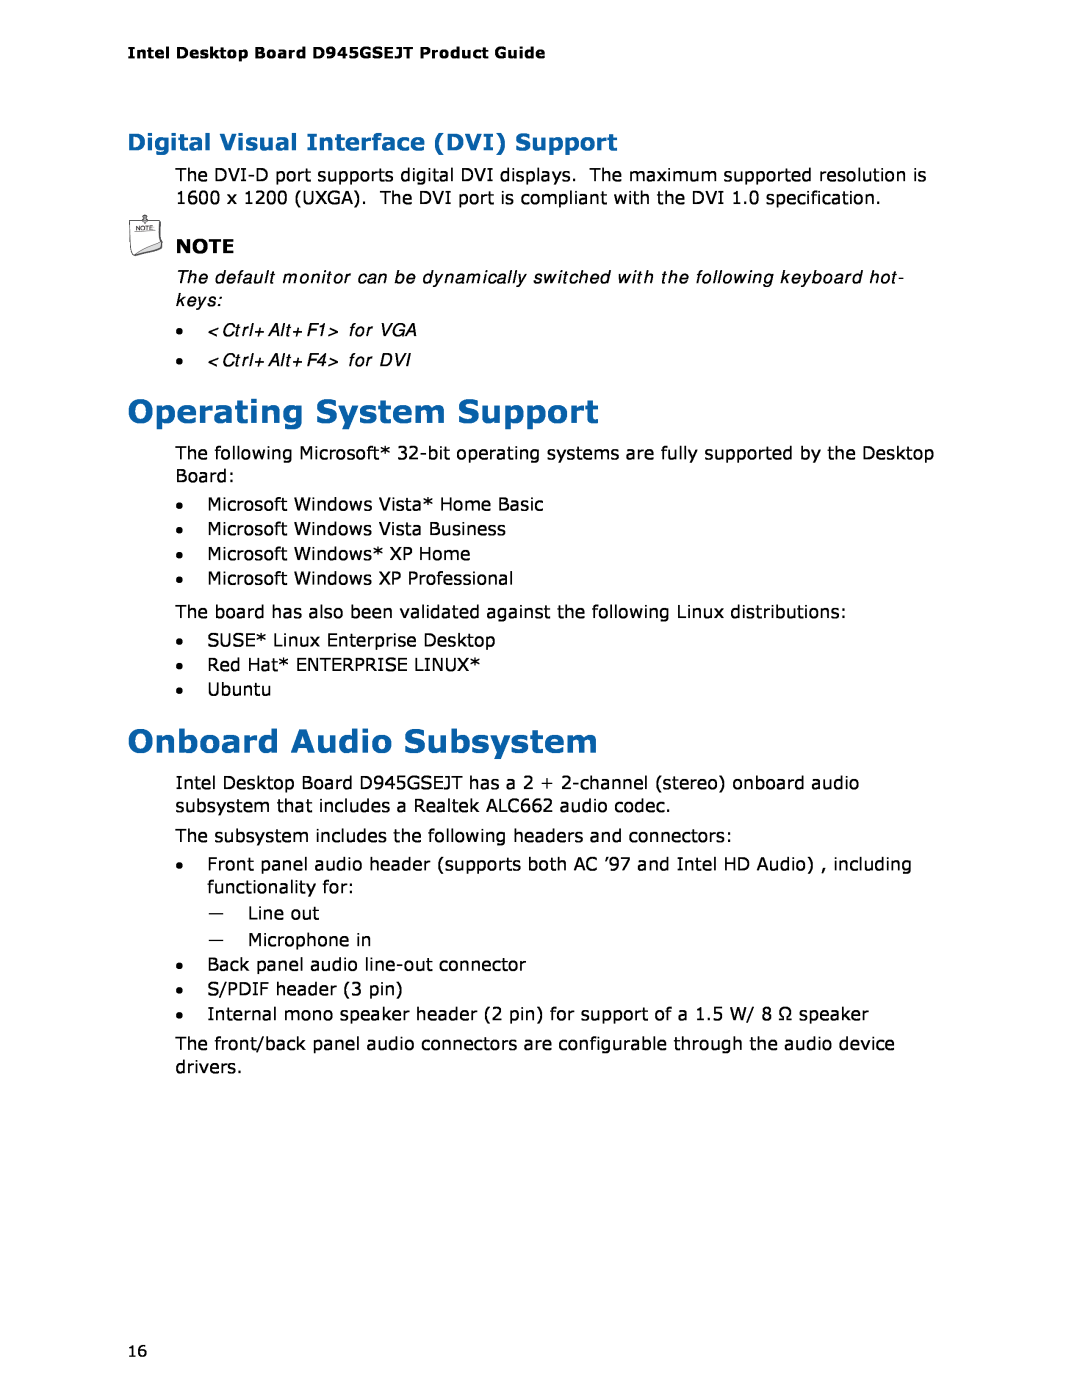 Intel D945GSEJT manual Operating System Support, Onboard Audio Subsystem, Digital Visual Interface DVI Support 